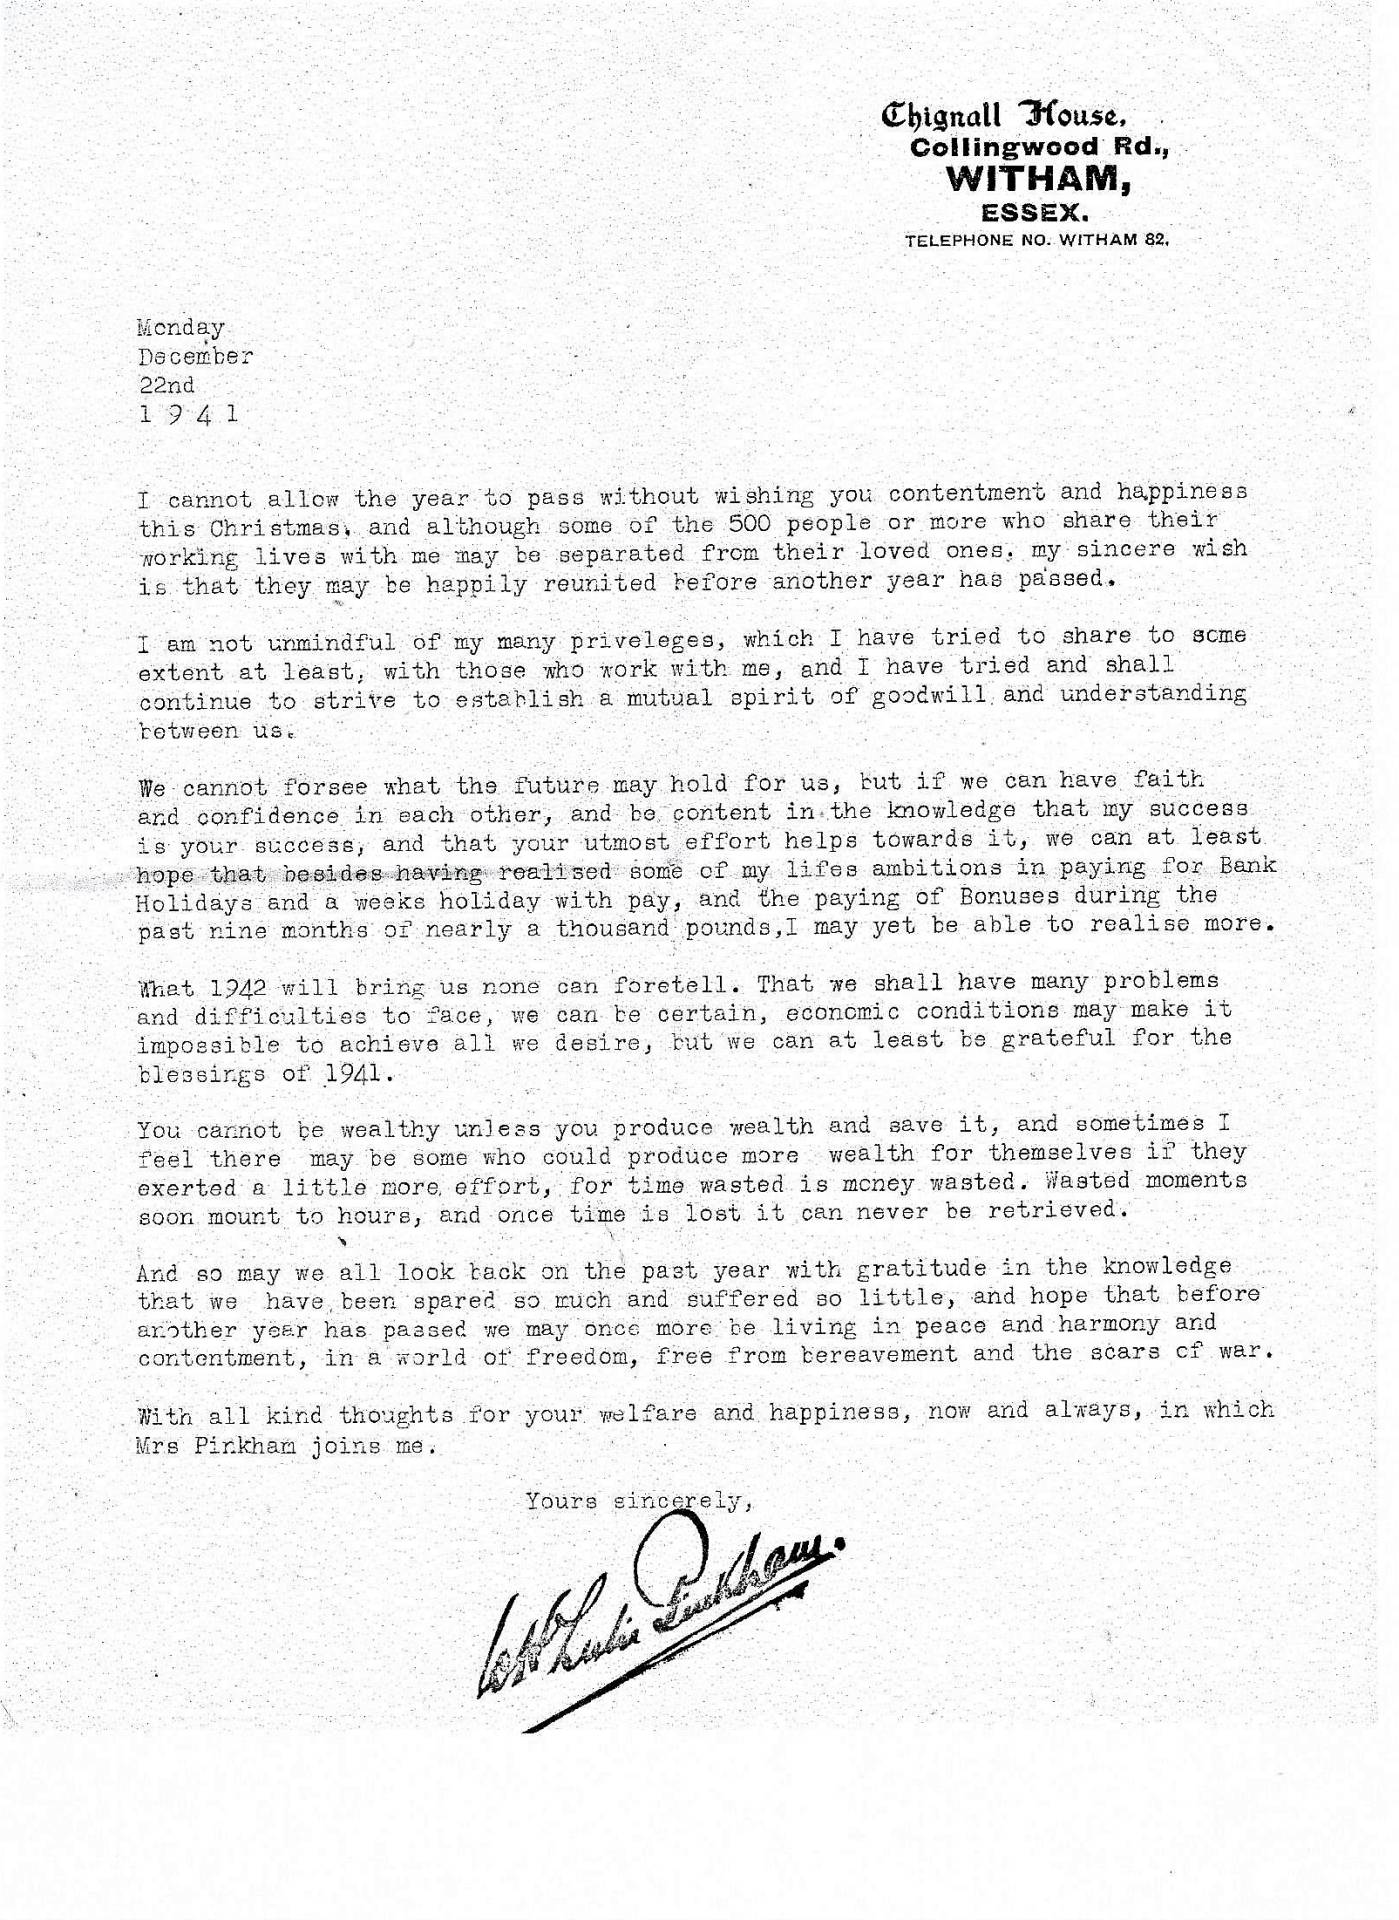 WHLP-letter-to-staff-December-1941